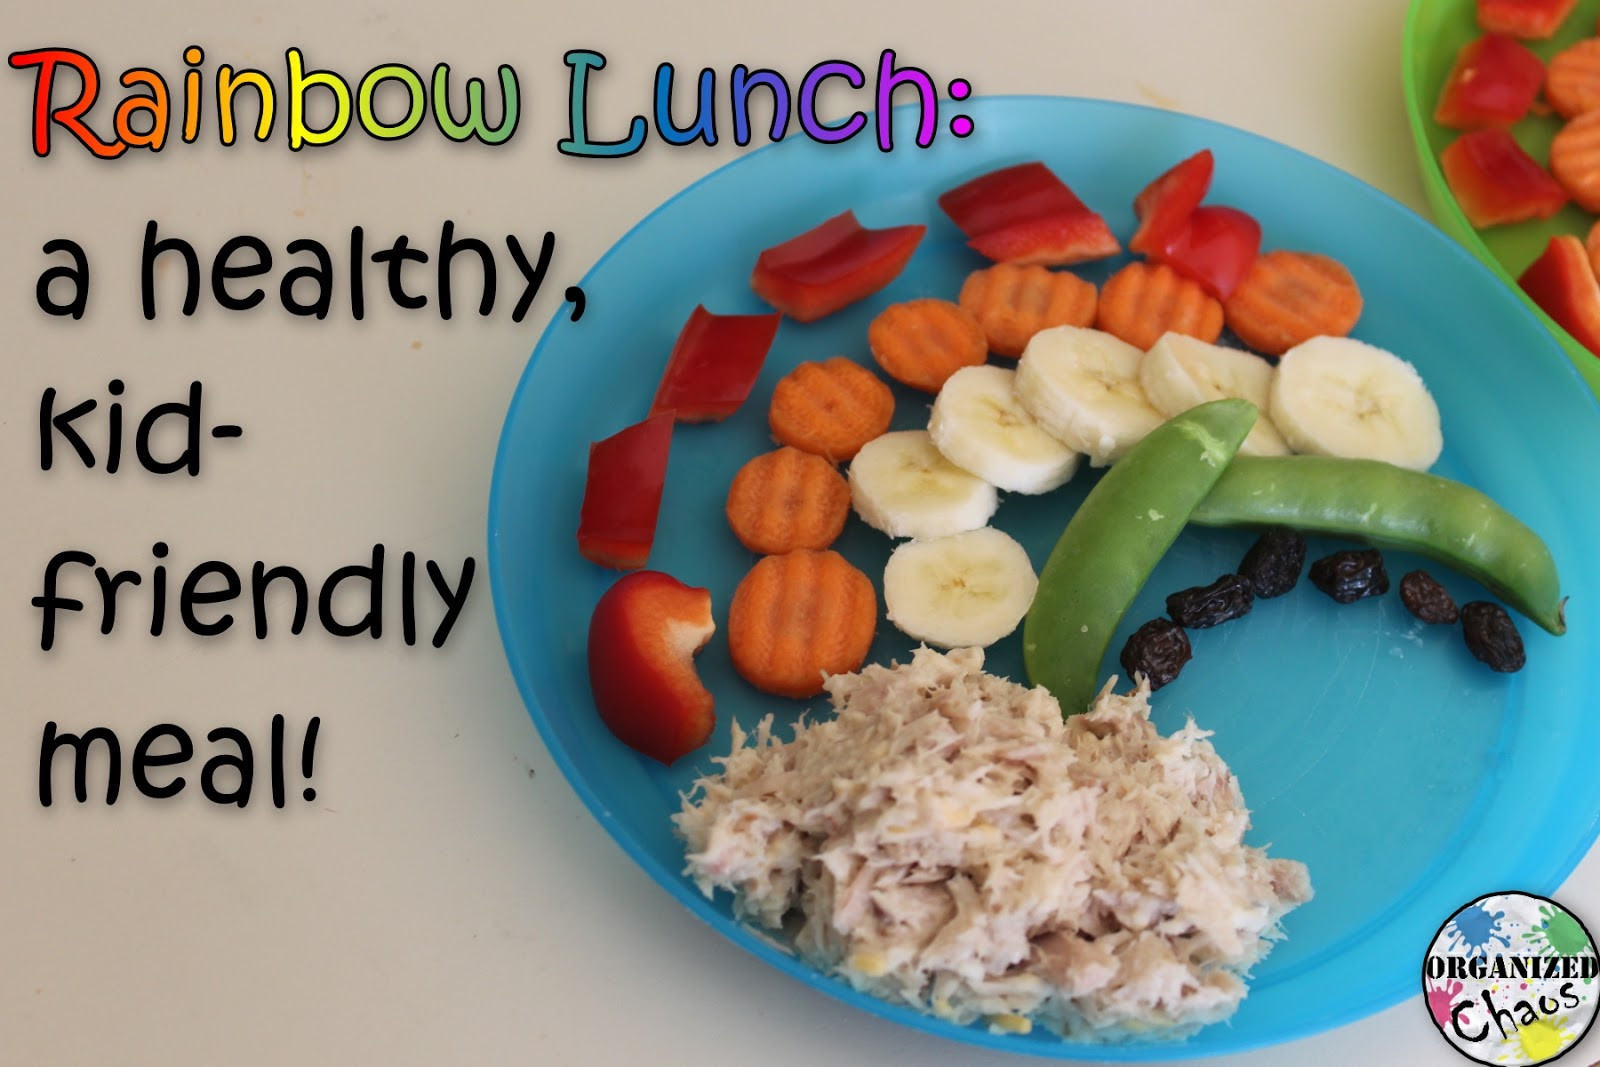 Healthy Kid Friendly Lunches
 rainbow lunch healthy kid friendly meal